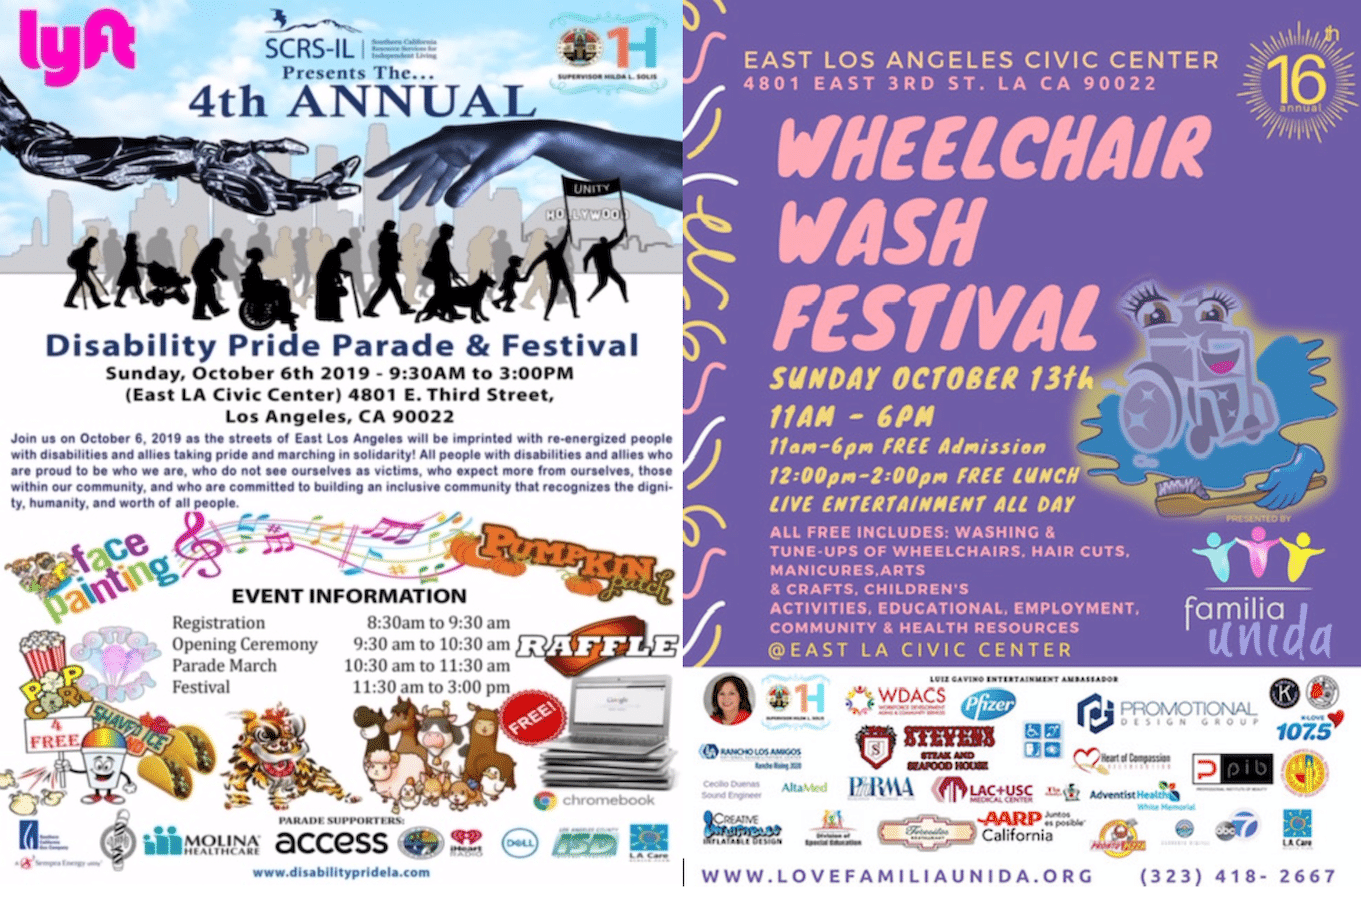 Two fliers side by side. The first reads, "4th Annual Disability Pride Parade & Festival. Sunday, October 6, 2019, 9:30am - 3pm, East LA Civic Center, 4801 E. 3rd Street, Los Angeles, CA 90022. The second reads, "Wheelchair Wash Festival, Sunday, October 13, 2019, 11am - 6pm. Free admission. East Los Angeles Civic Center, 4801 East 3rd Street, Los Angeles, CA 90022.